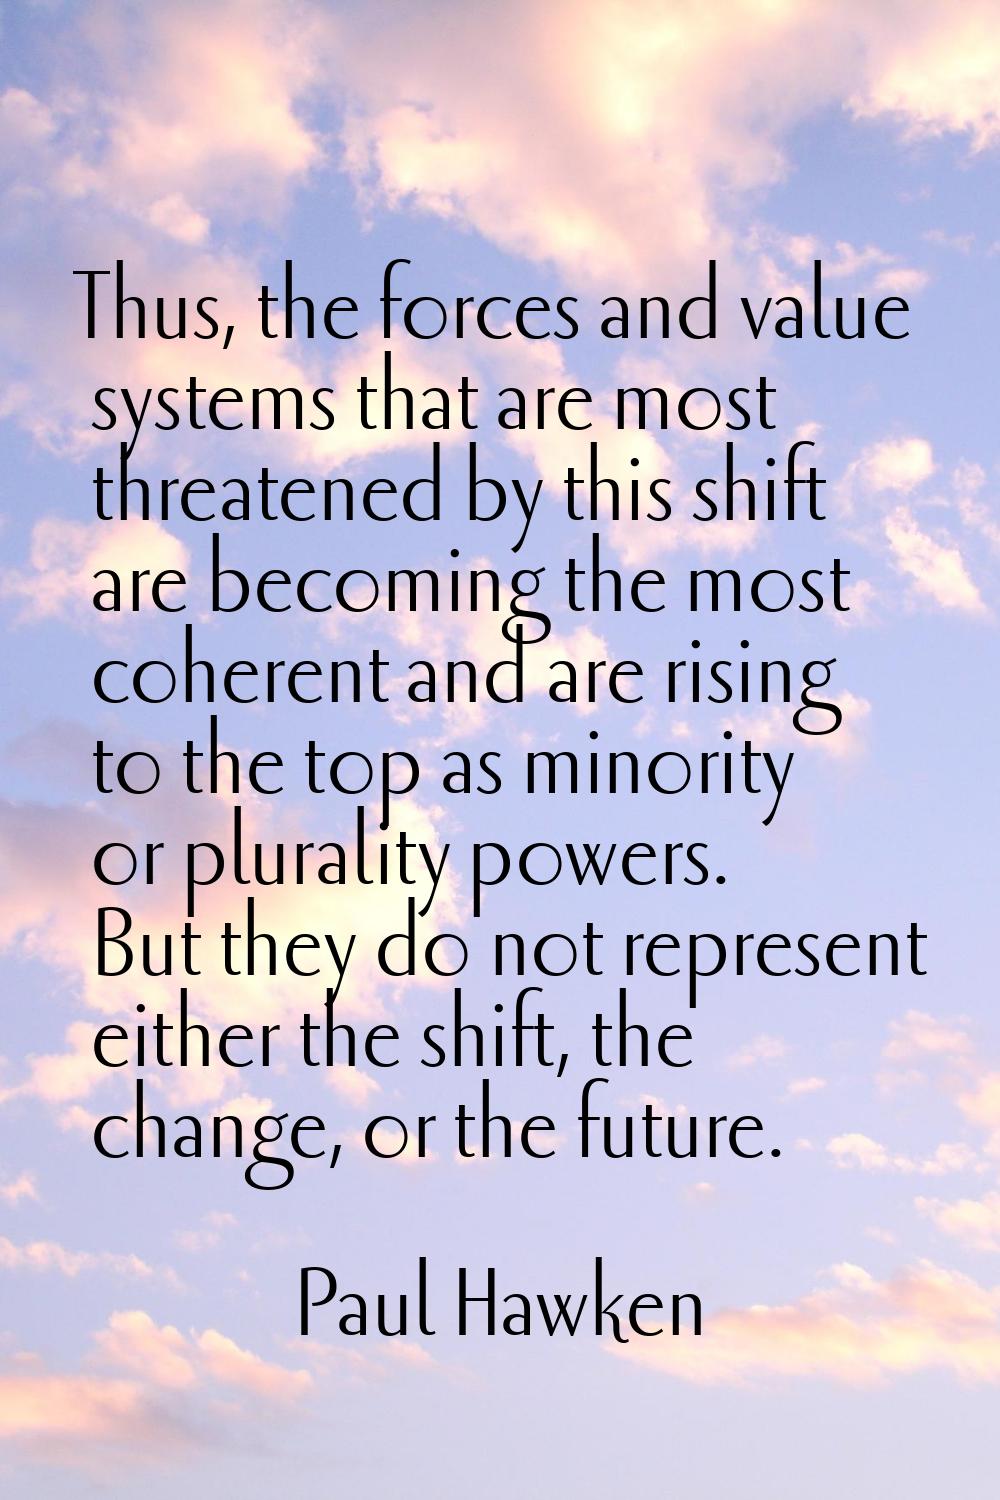 Thus, the forces and value systems that are most threatened by this shift are becoming the most coh